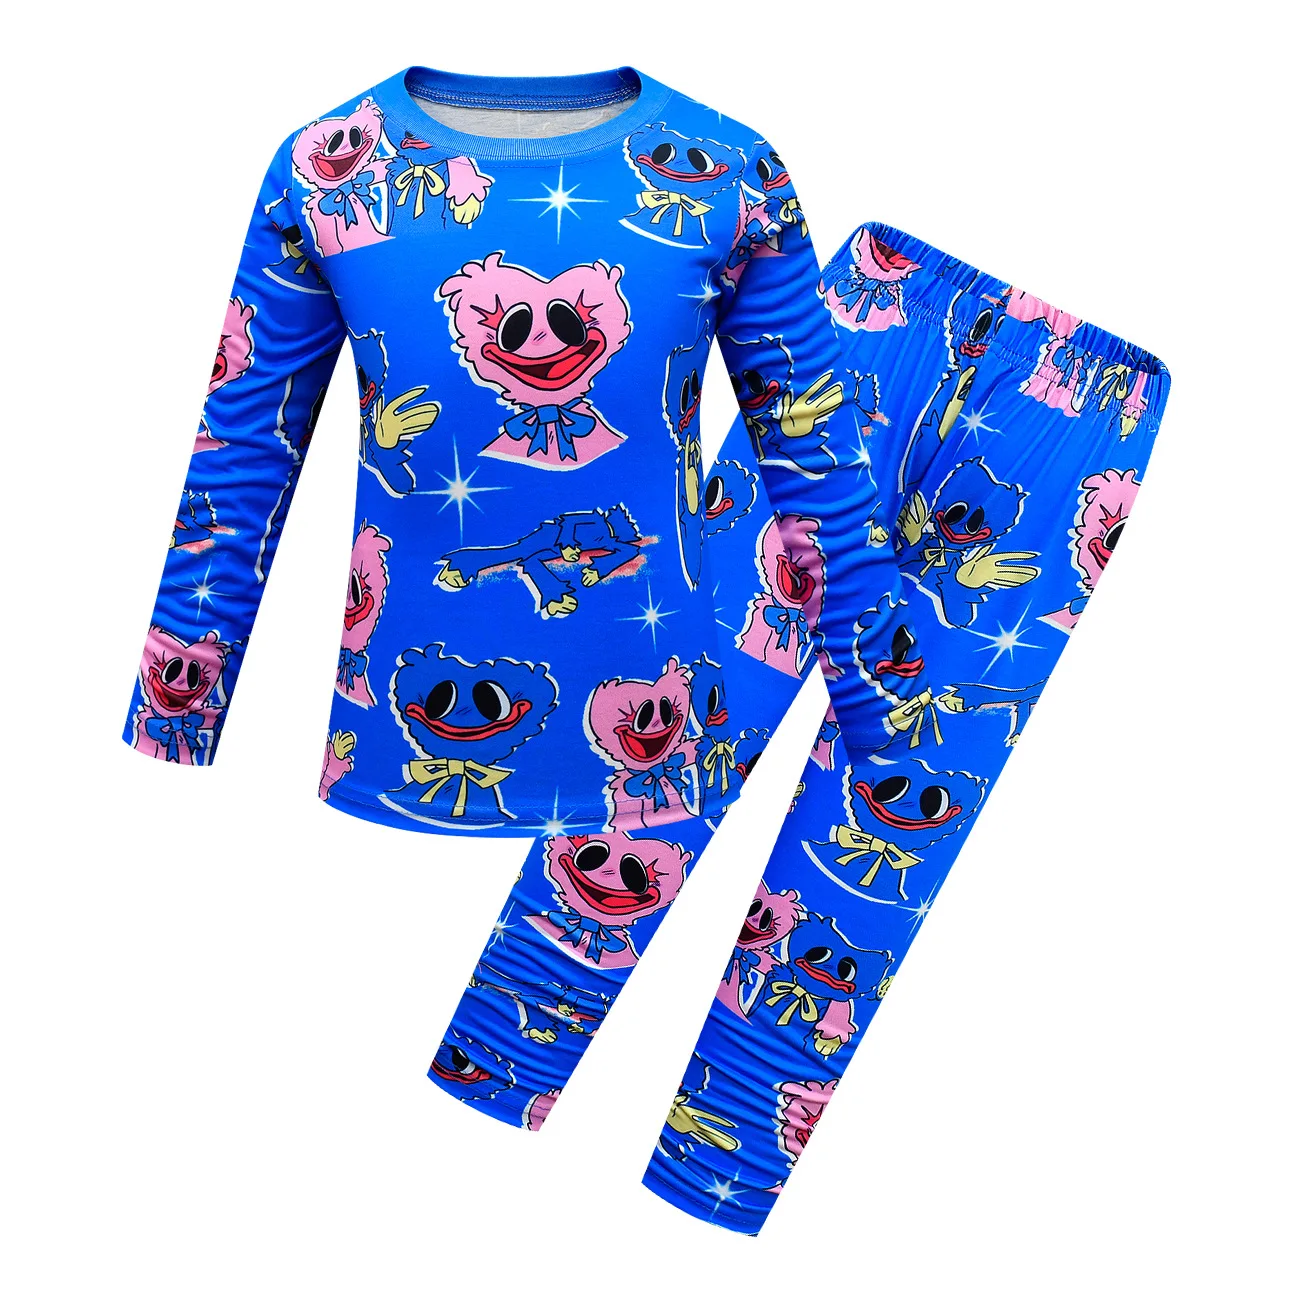 Poppy Playtime 3D Hoodies Pants Suit Cosplay Huggy Wuggy Full Tracksuit Set Gift